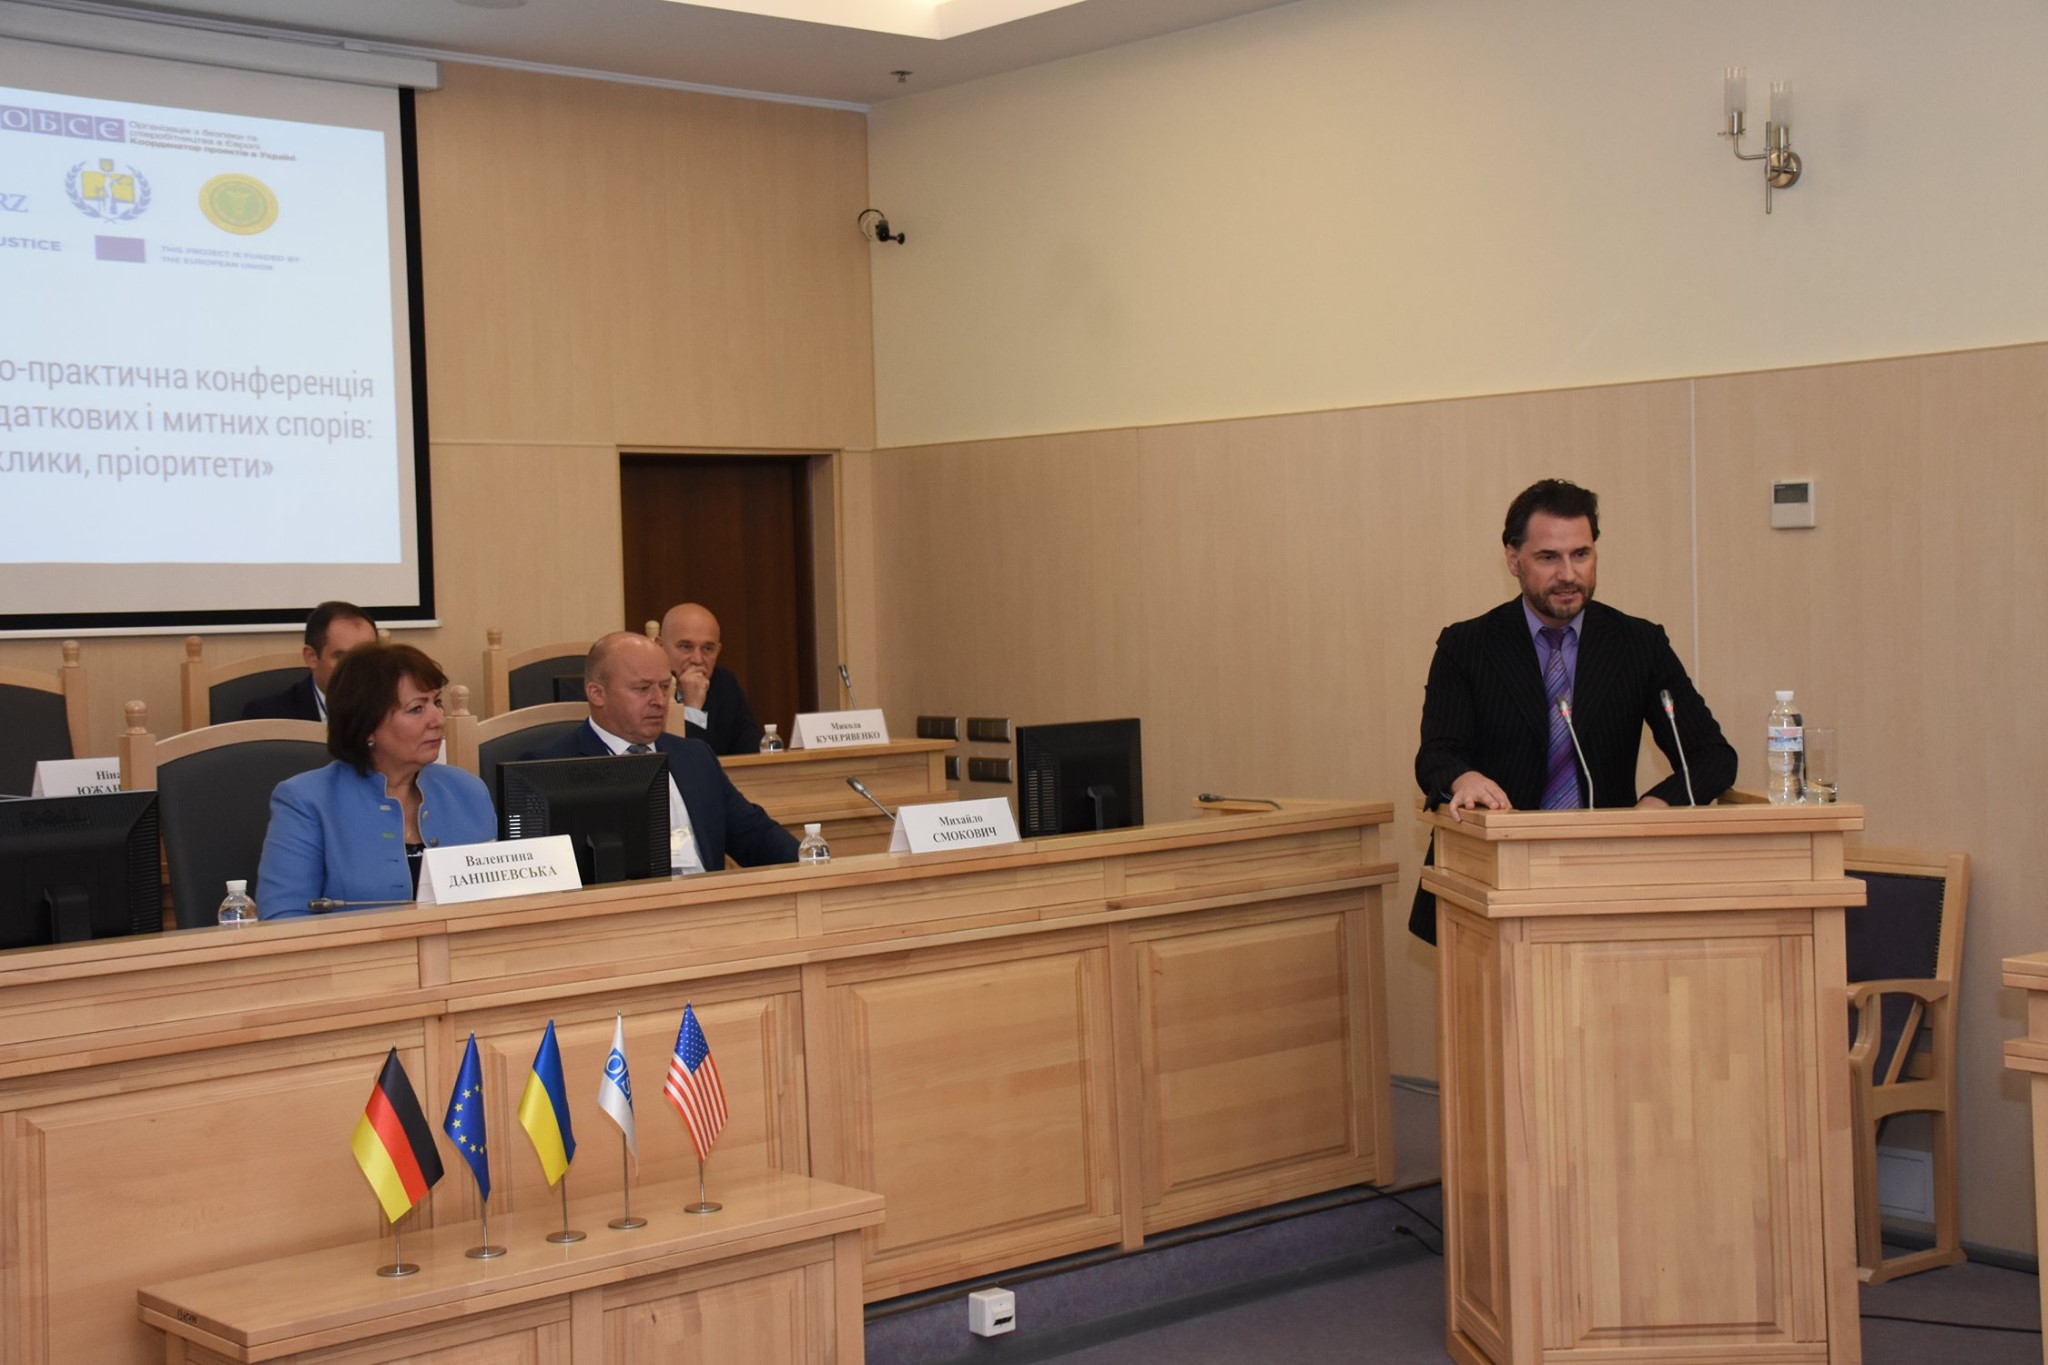 The Second International Panel Conference “Judicial Examination of Tax and Customs Disputes: Problems, Challenges, Priorities”